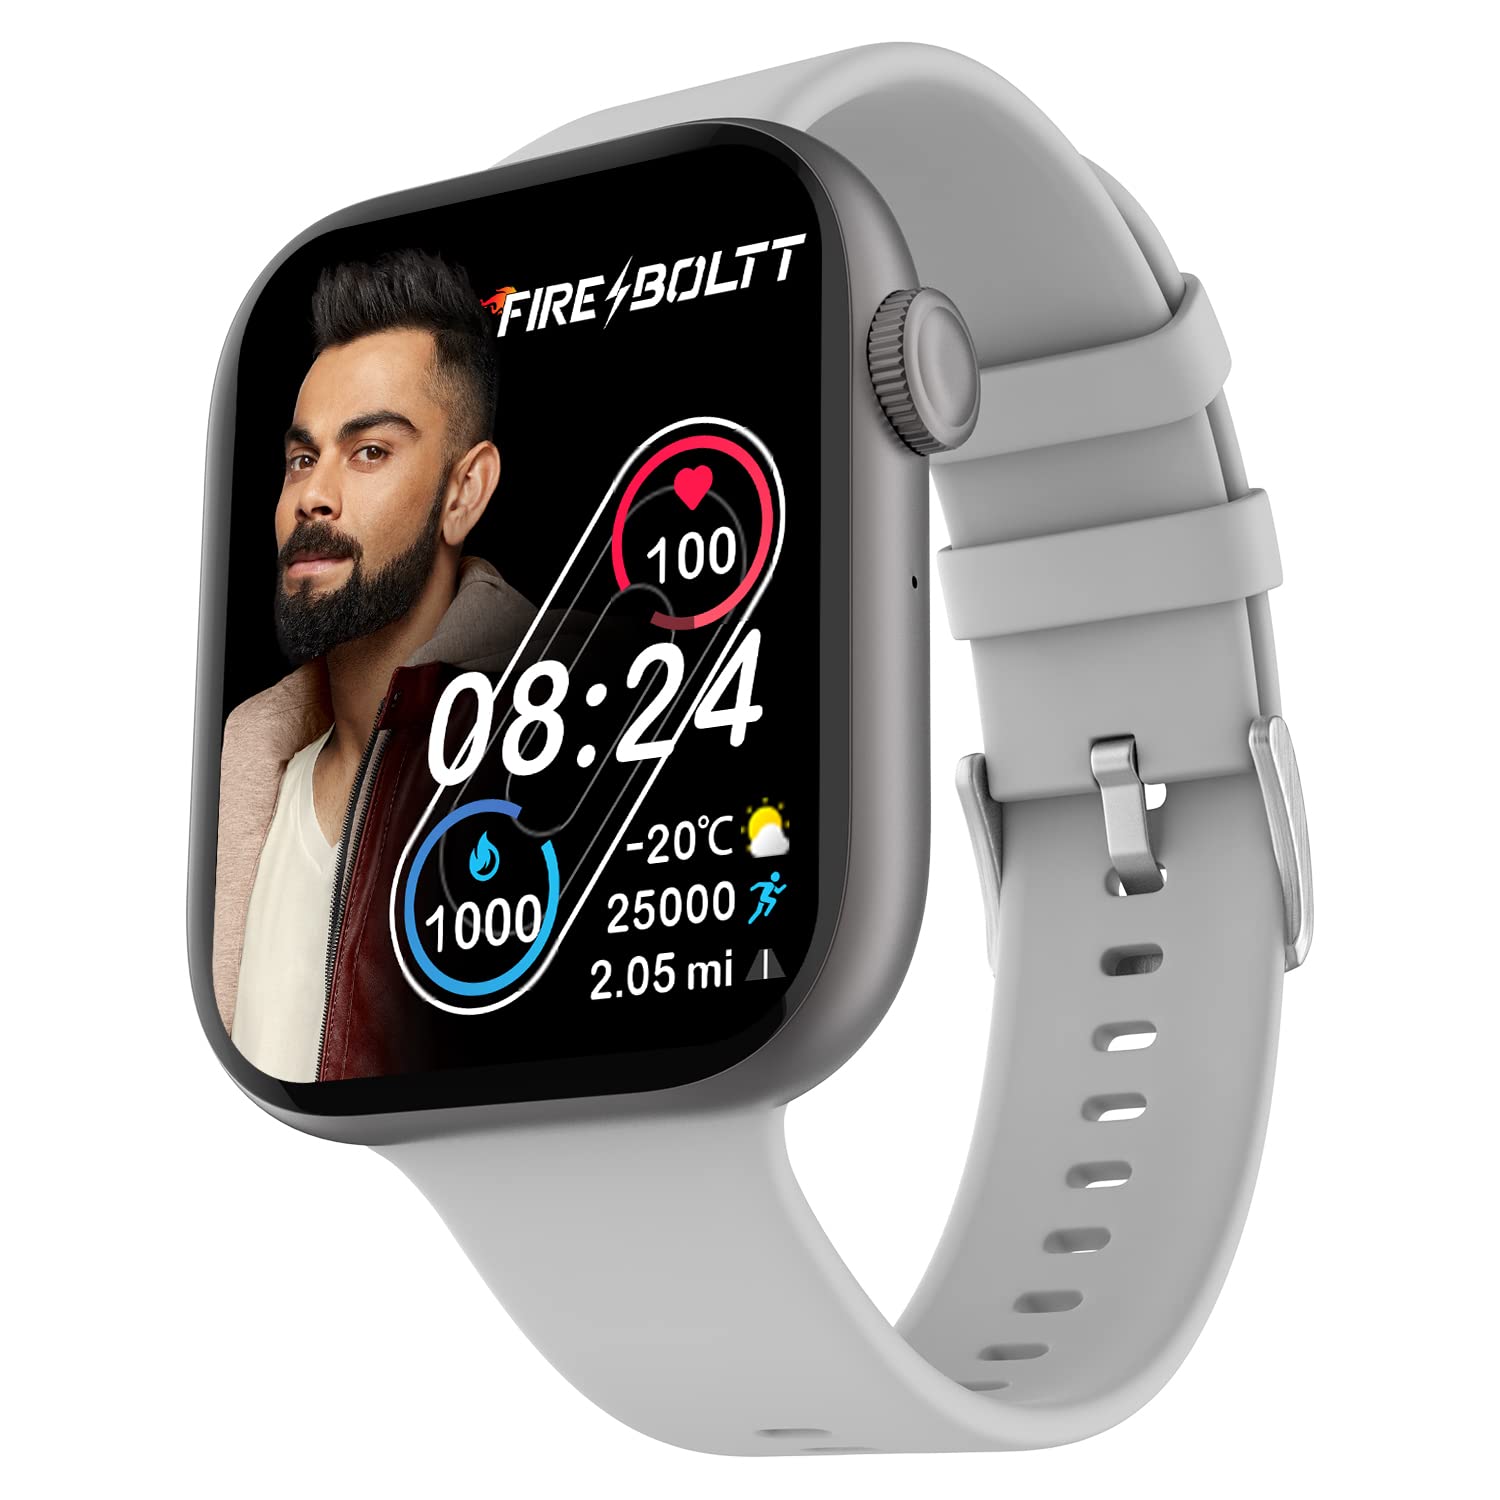 Fire-Boltt Ring 3 Bluetooth Calling Smartwatch 1.8″ Biggest Display, Voice Assistance,118 Sports Modes, in Built Calculator & Games, SpO2, Heart Rate Monitoring, Grey, Free Size